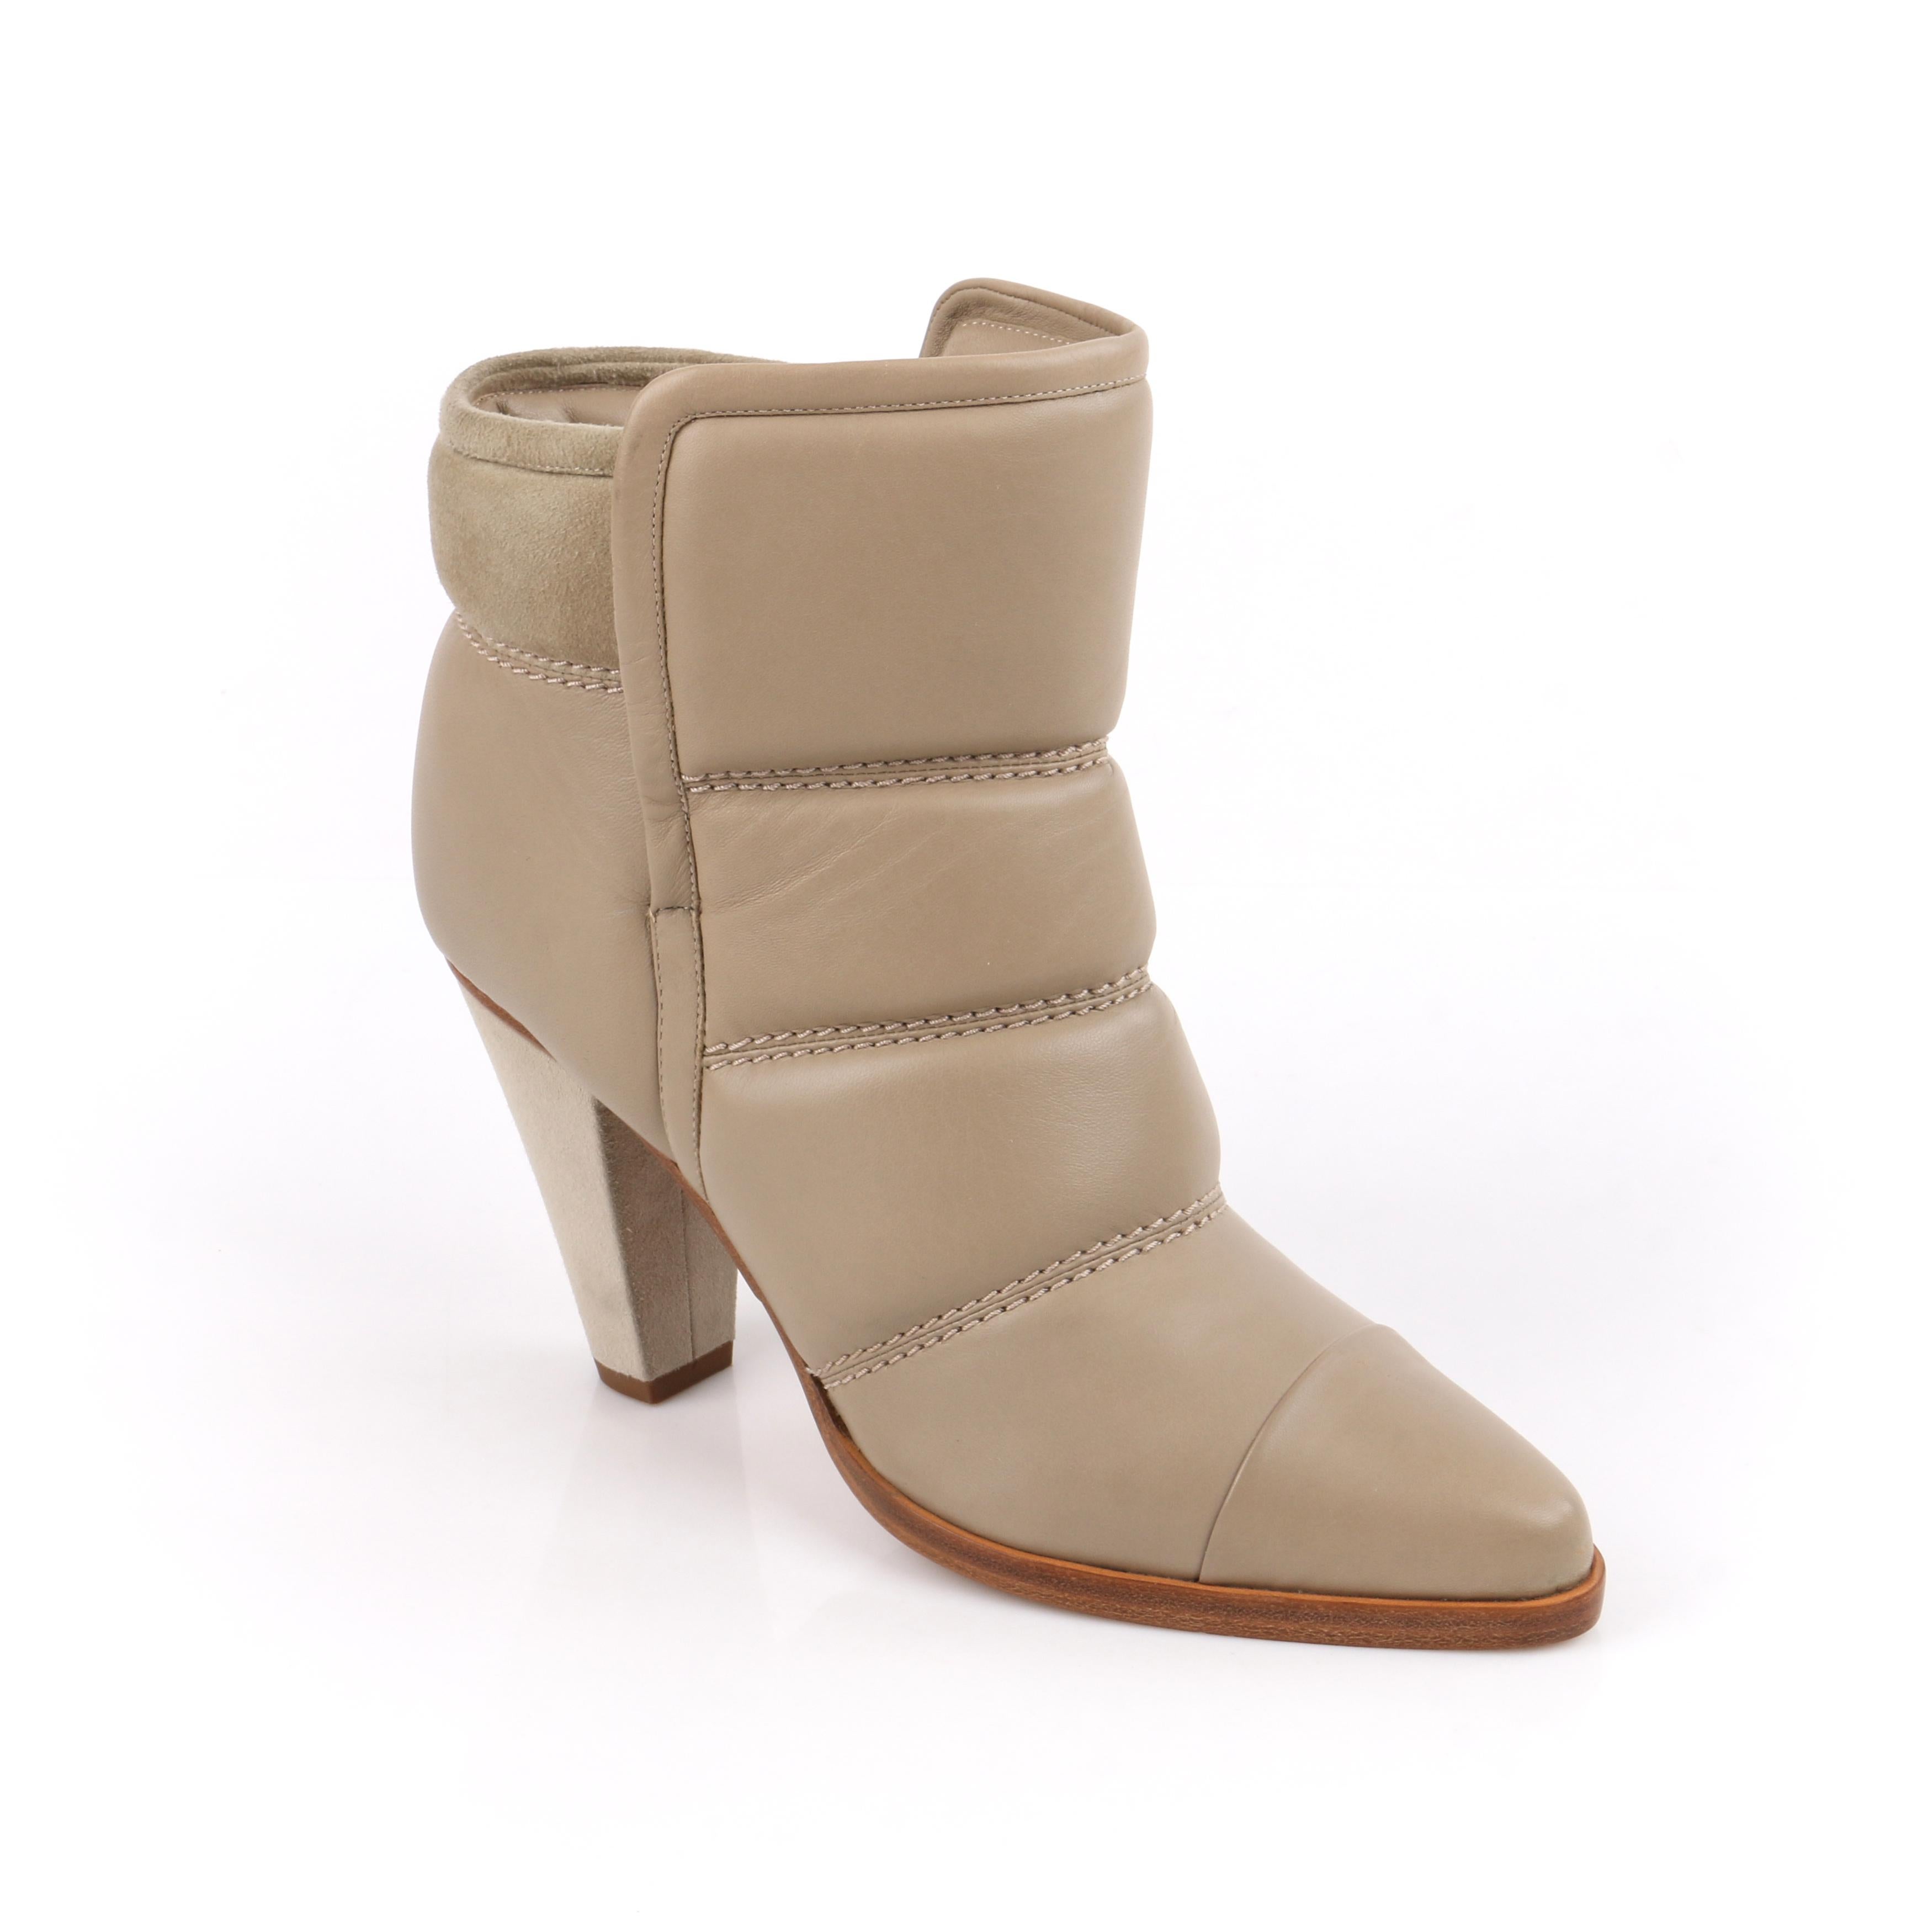 CHLOE A/W c.2014 Natural Taupe Padded Quilted Leather Suede Ankle Booties
 
Estimated Retail: $995
 
Brand / Manufacturer: Chloe
Designer: Gaby Aghion
Collection: Autumn / Winter 2014, Runway look #2
Manufacturer Style Name: Devon
Style: Ankle